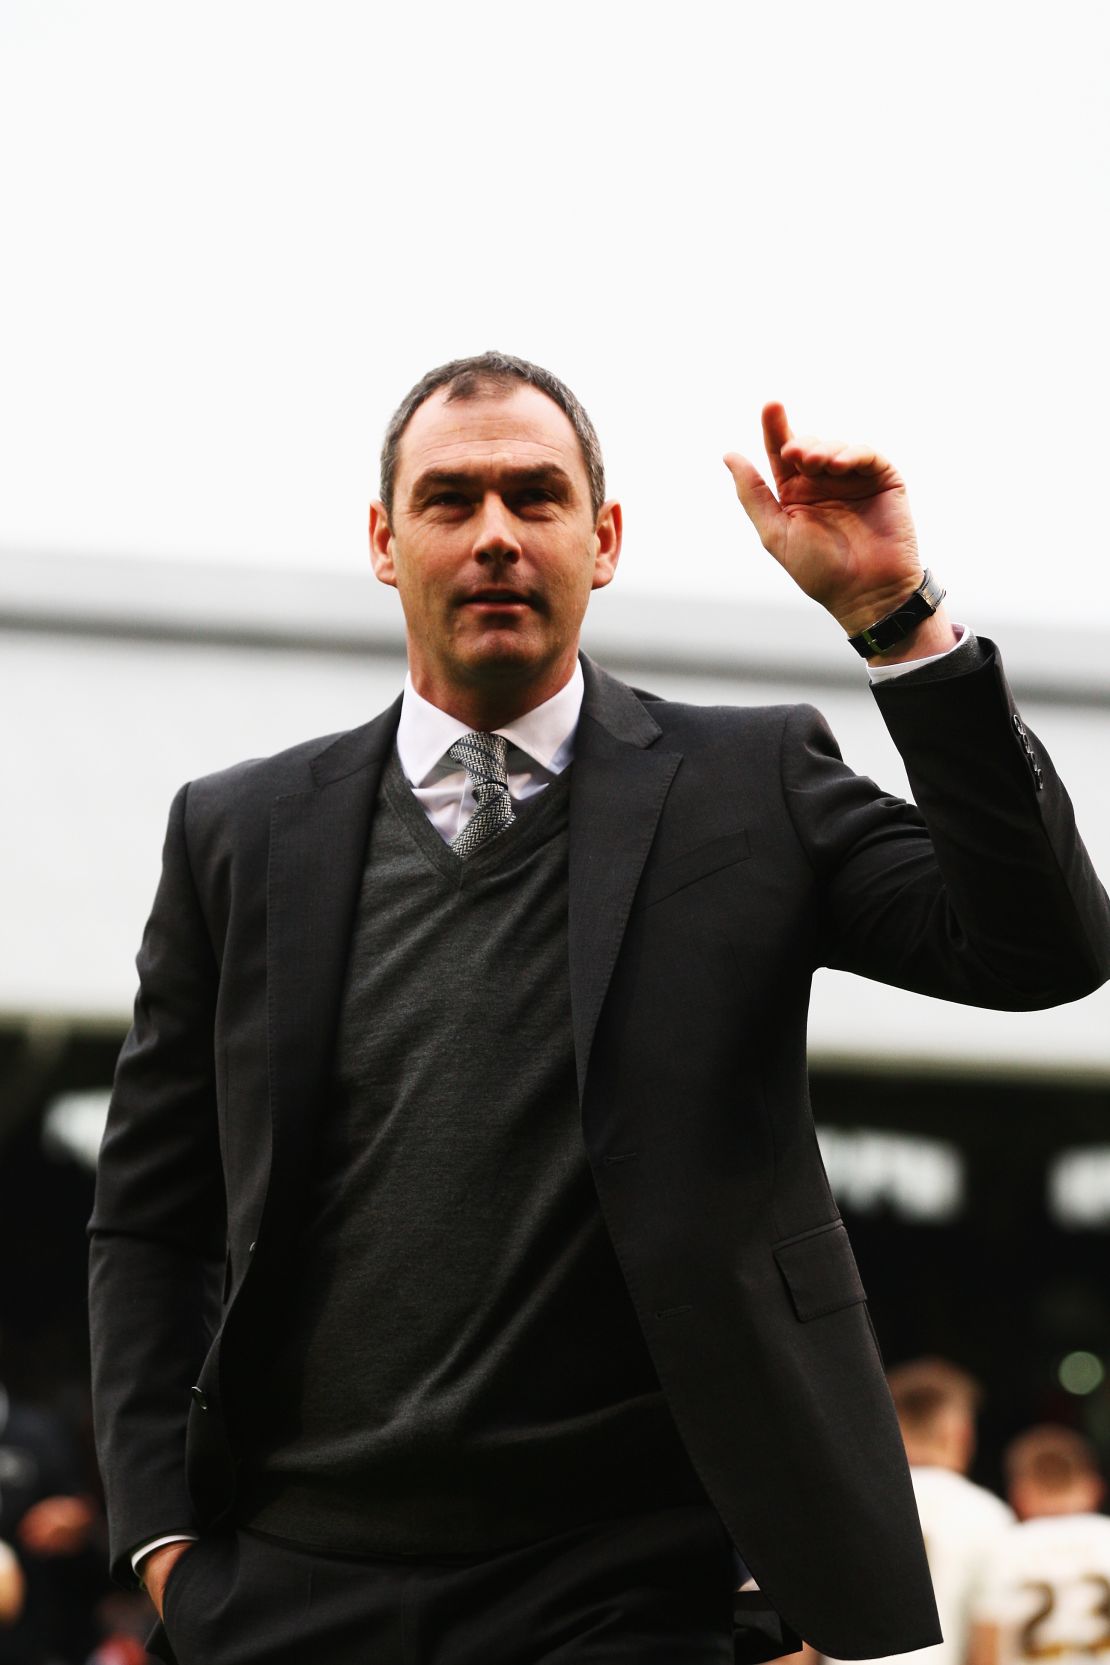 Having worked as an assistant manager at Chelsea, PSG, Real Madrid and Bayern Munich, new Swansea boss Paul Clement will hope the only way is up.